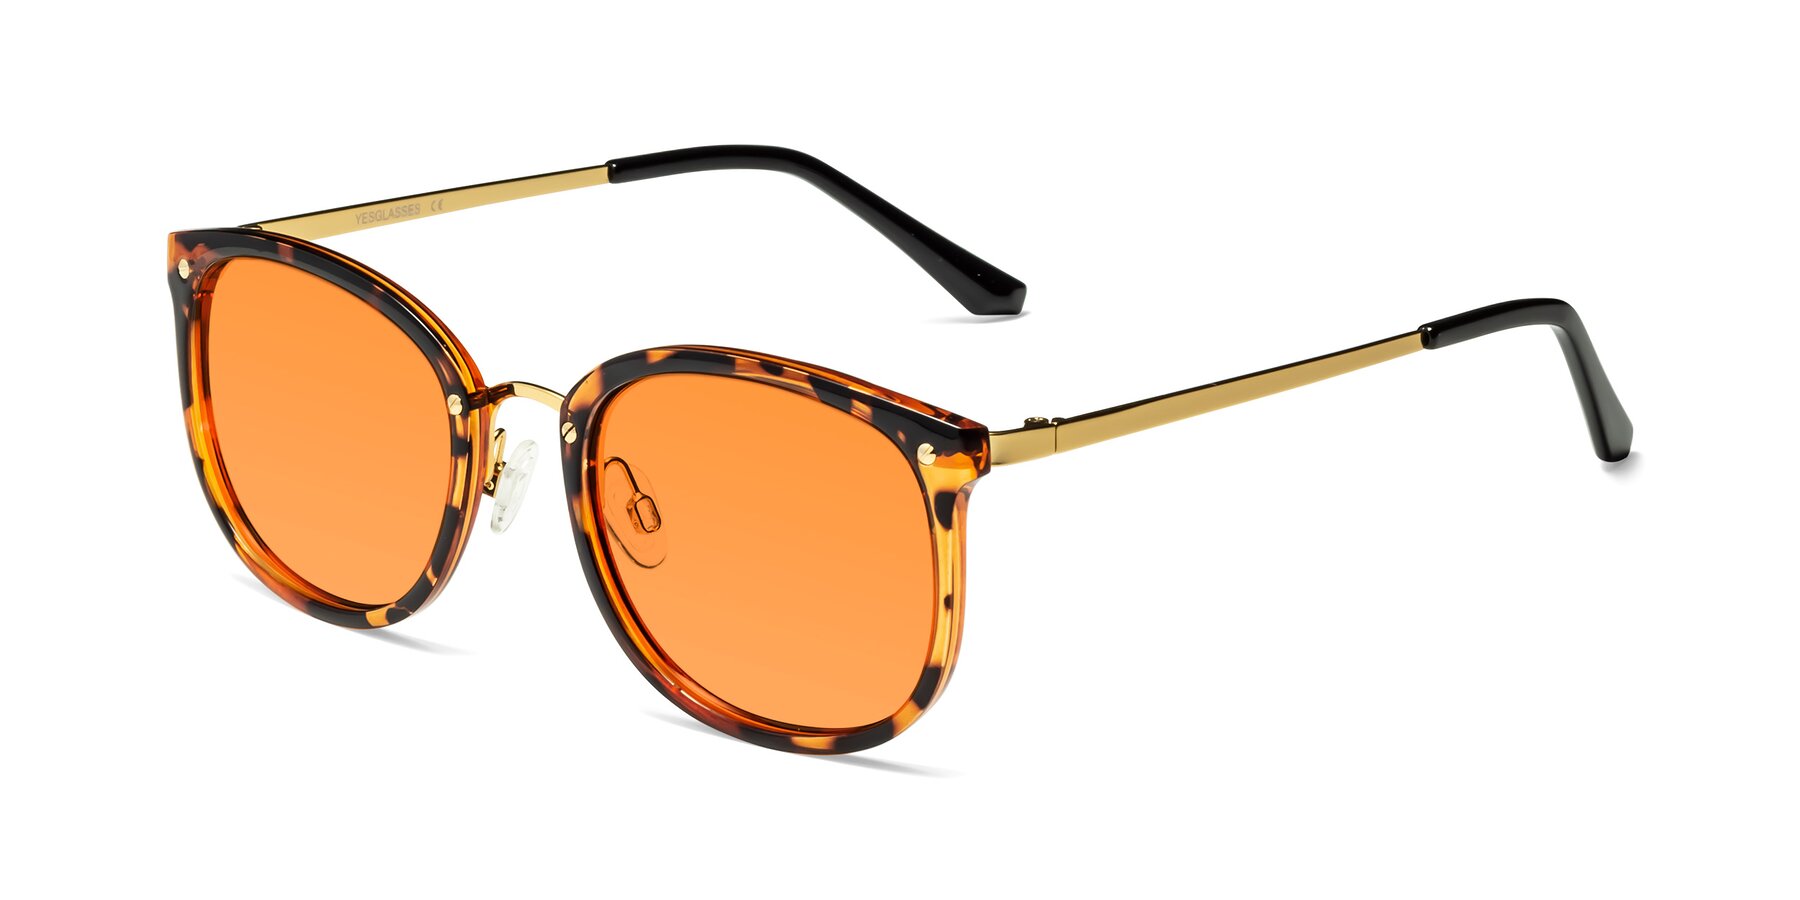 Angle of Timeless in Tortoise-Golden with Orange Tinted Lenses